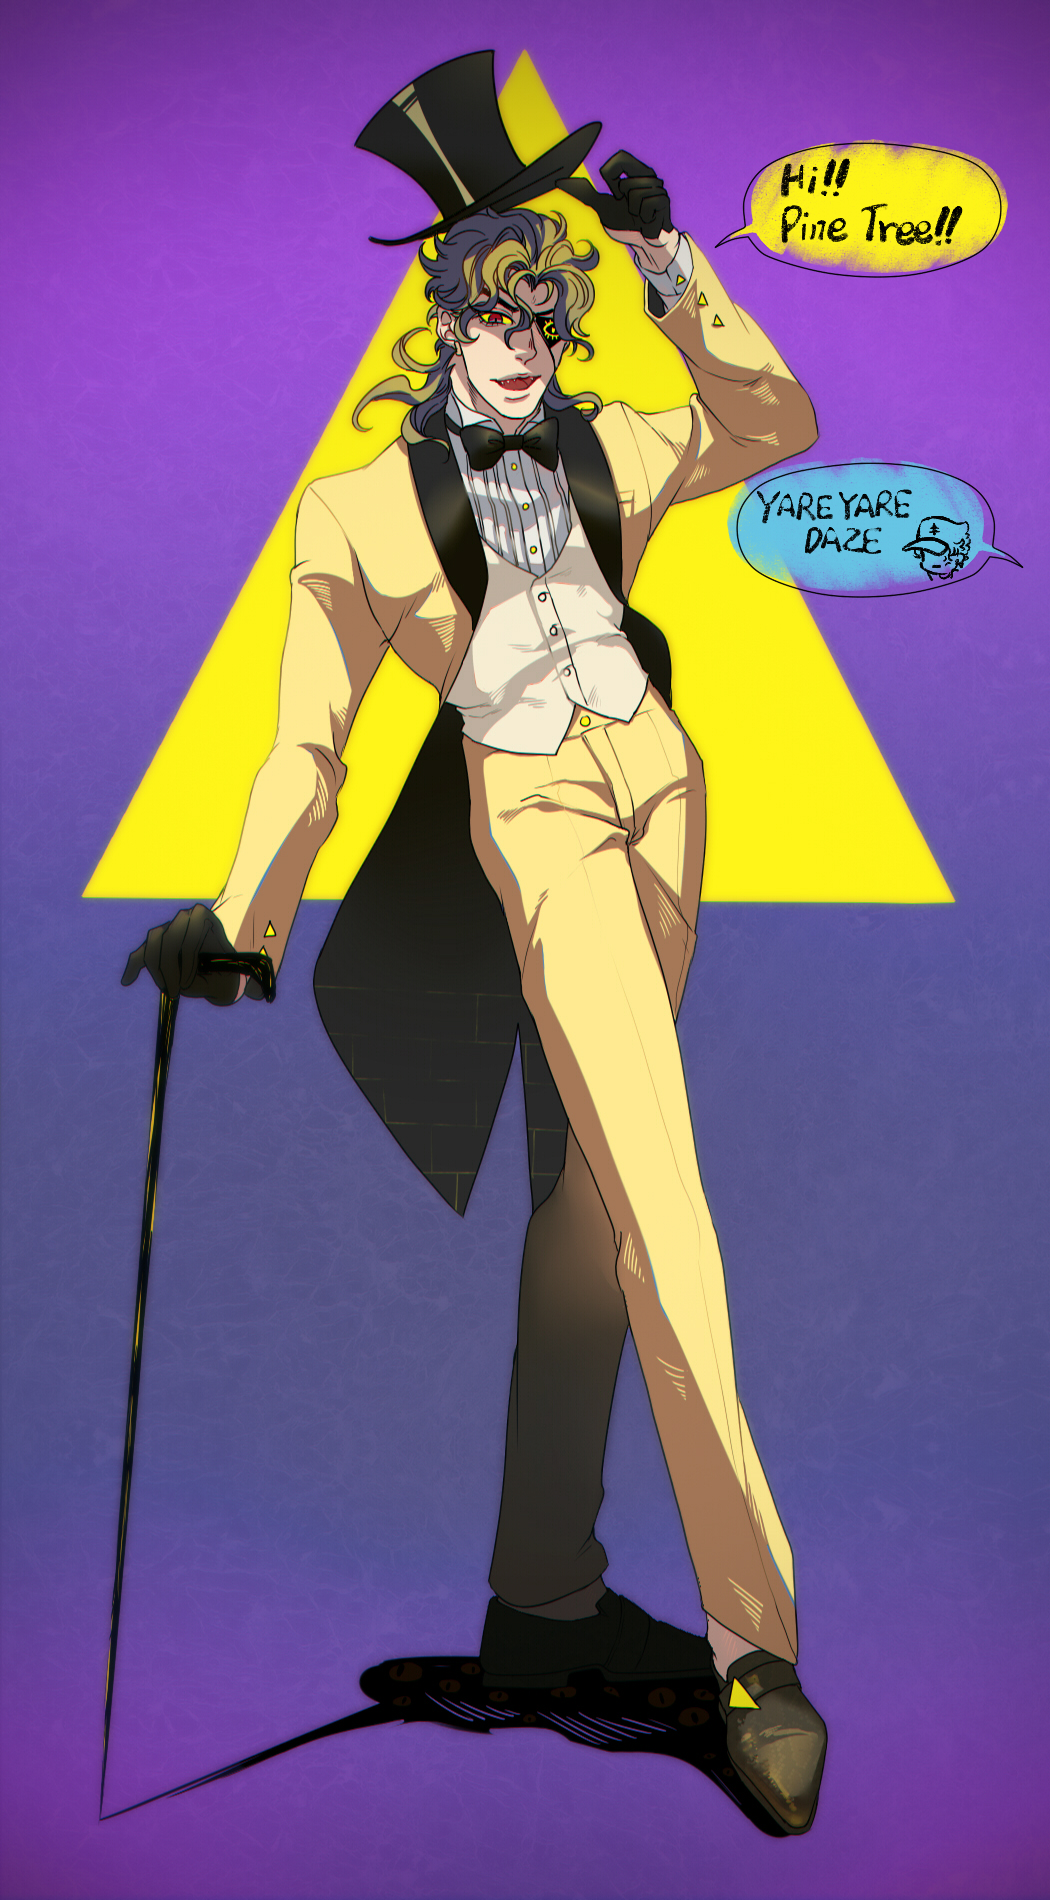 1boy alternate_costume bill_cipher bill_cipher_(cosplay) black_gloves bow bowtie cane cosplay dio_brando formal gloves gravity_falls hat highres jojo_no_kimyou_na_bouken kujo_jotaro less_end not_present pyramid solo stardust_crusaders suit three-piece_suit top_hat triangle tuxedo vest waistcoat yellow_suit